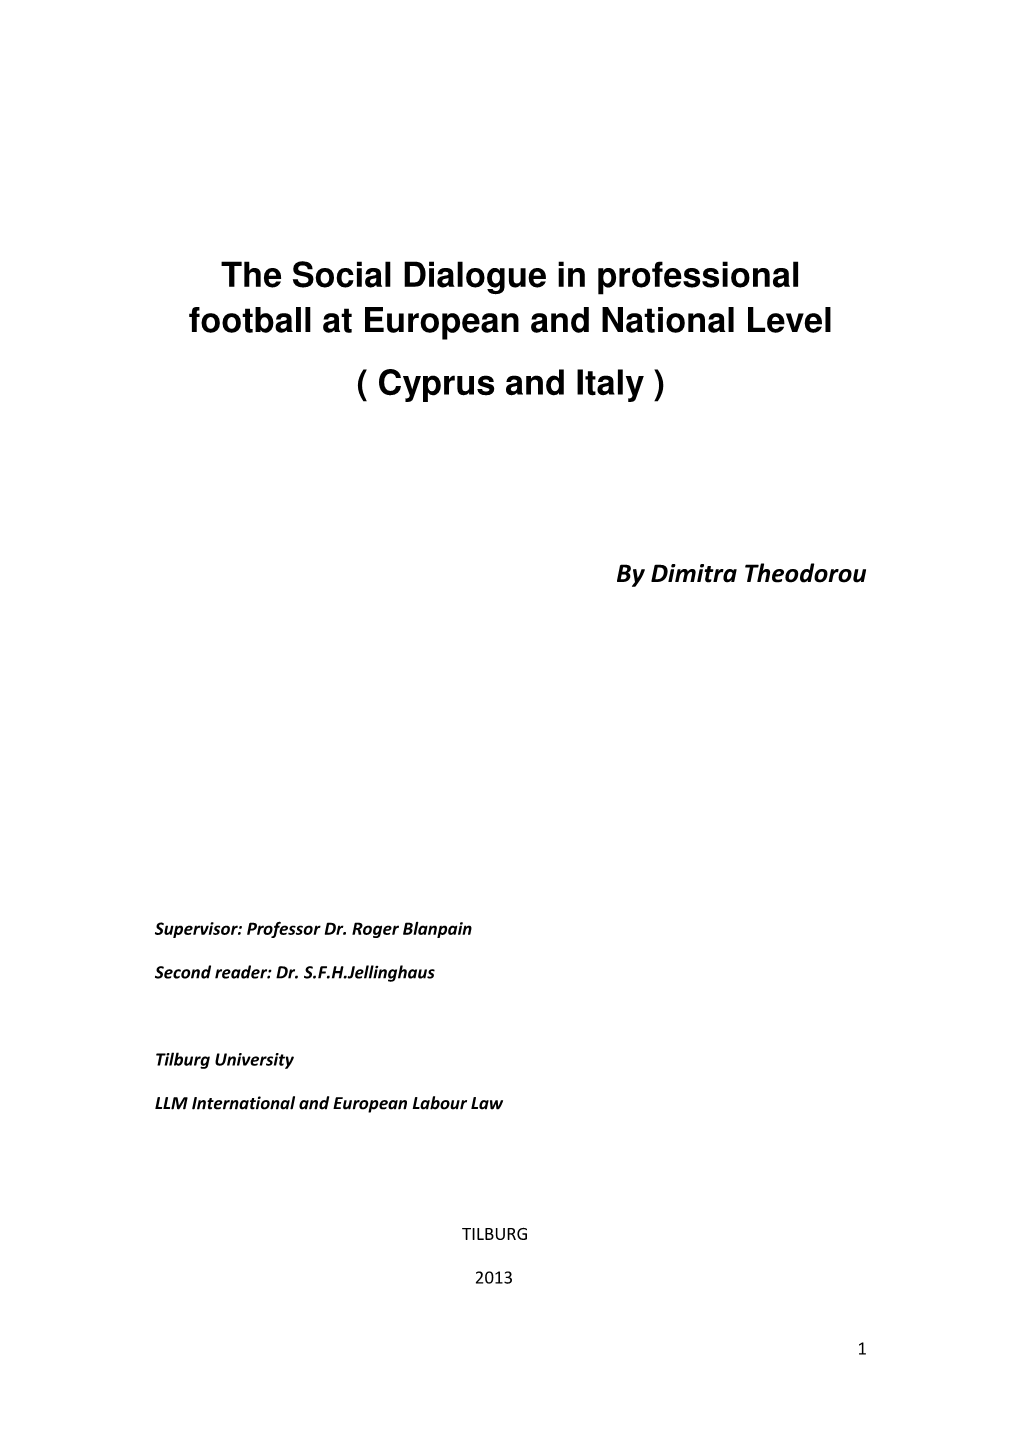 The Social Dialogue in Professional Football at European and National Level ( Cyprus and Italy )